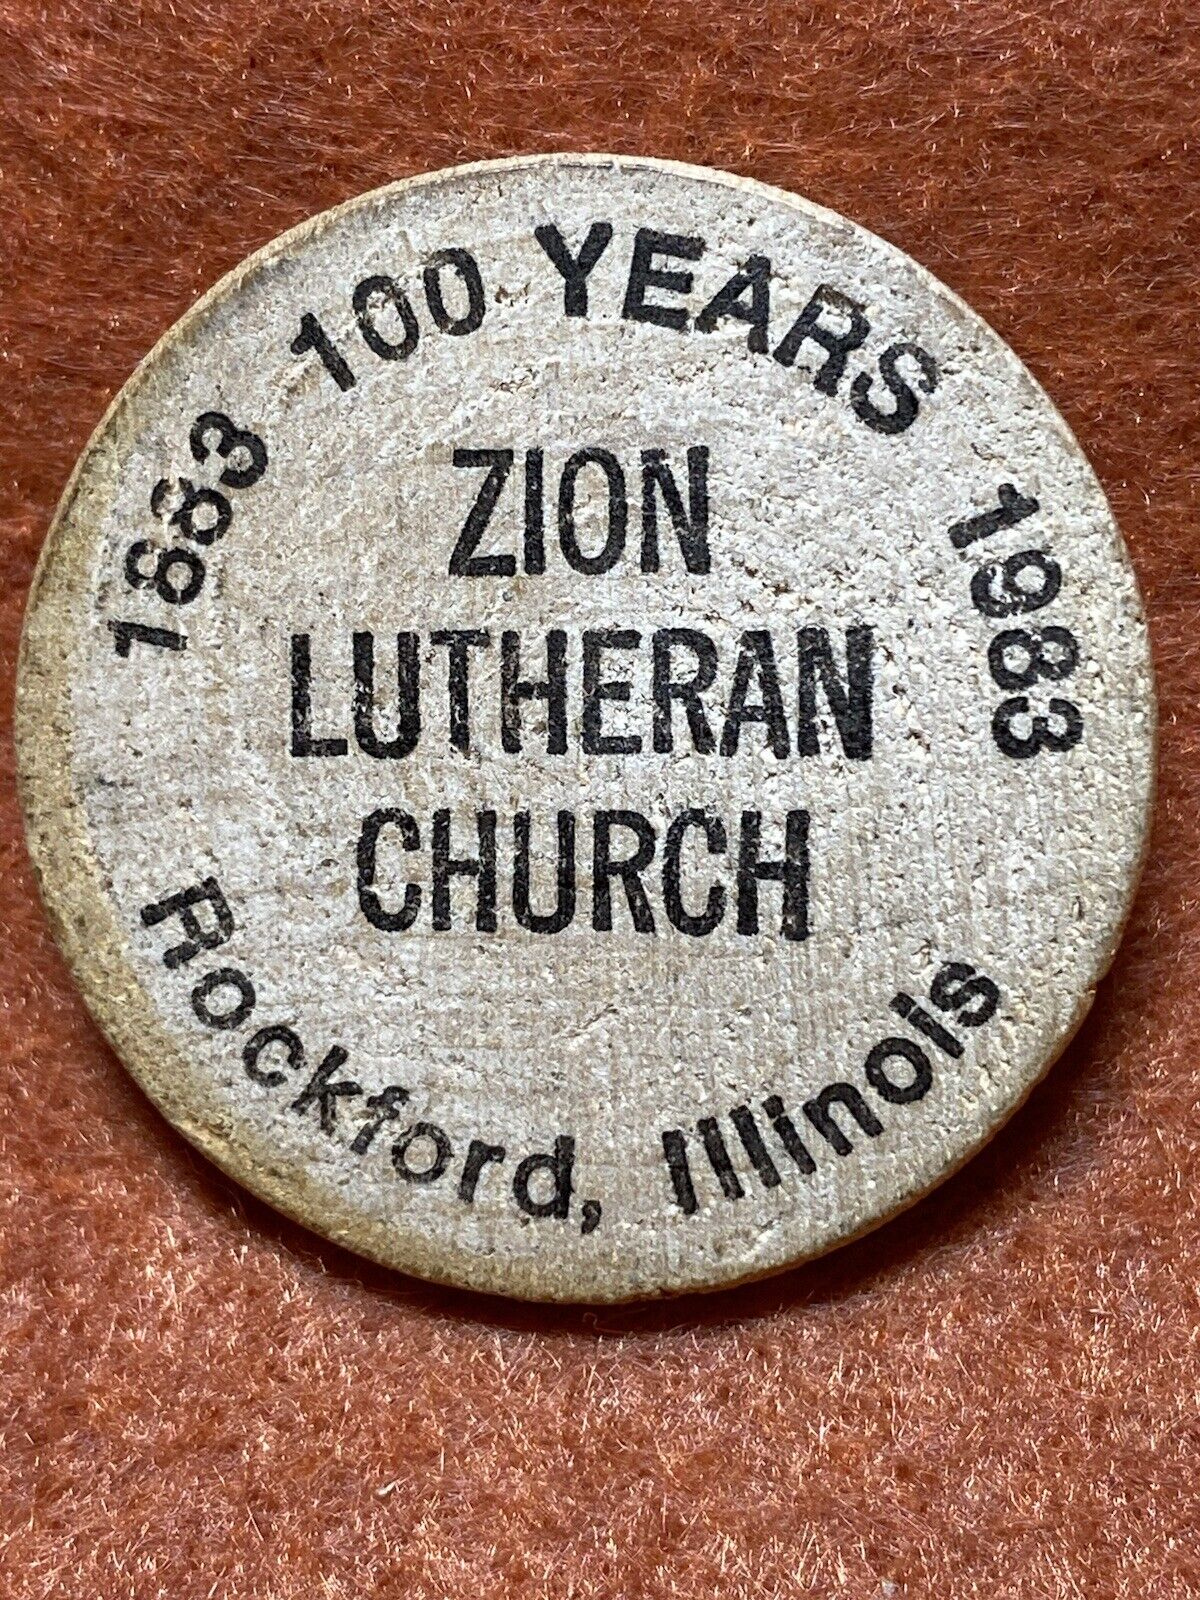 Rockford IL Zion SEAL limited product Lutheran Church 100 Hea Fixed price for sale Years Indian 1883-1983